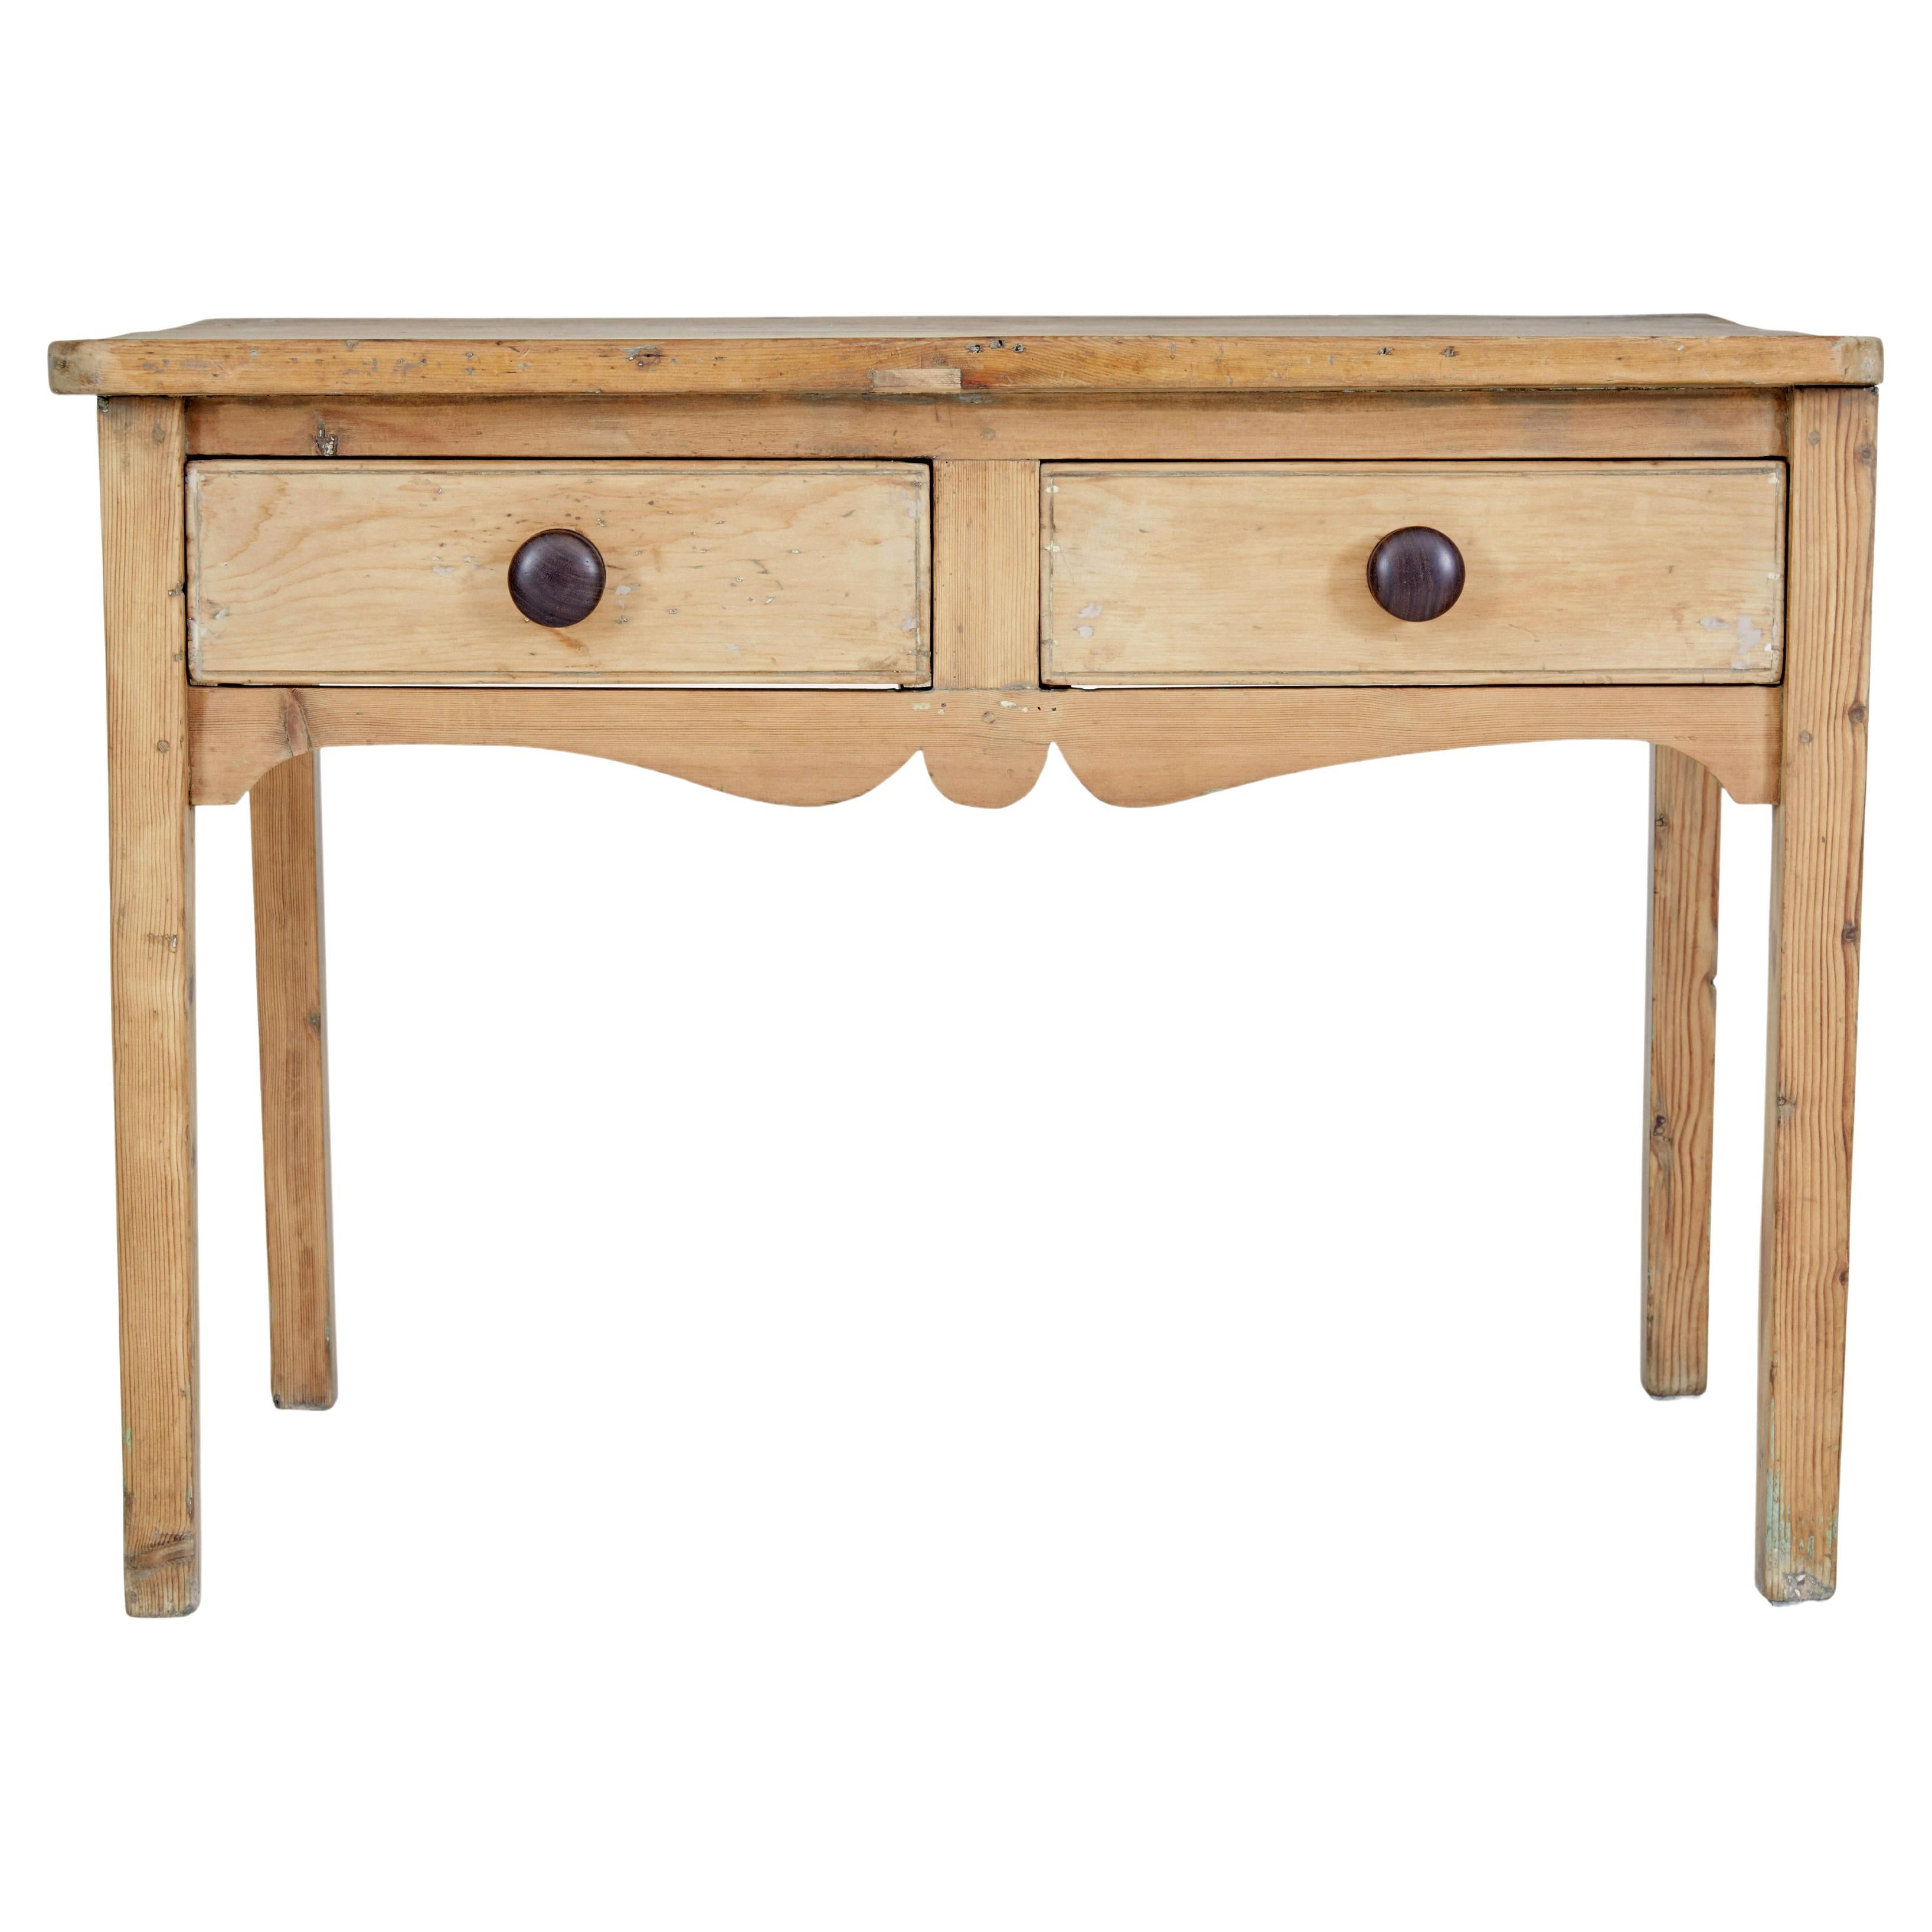 Rustic 19th century Victorian pine kitchen table For Sale